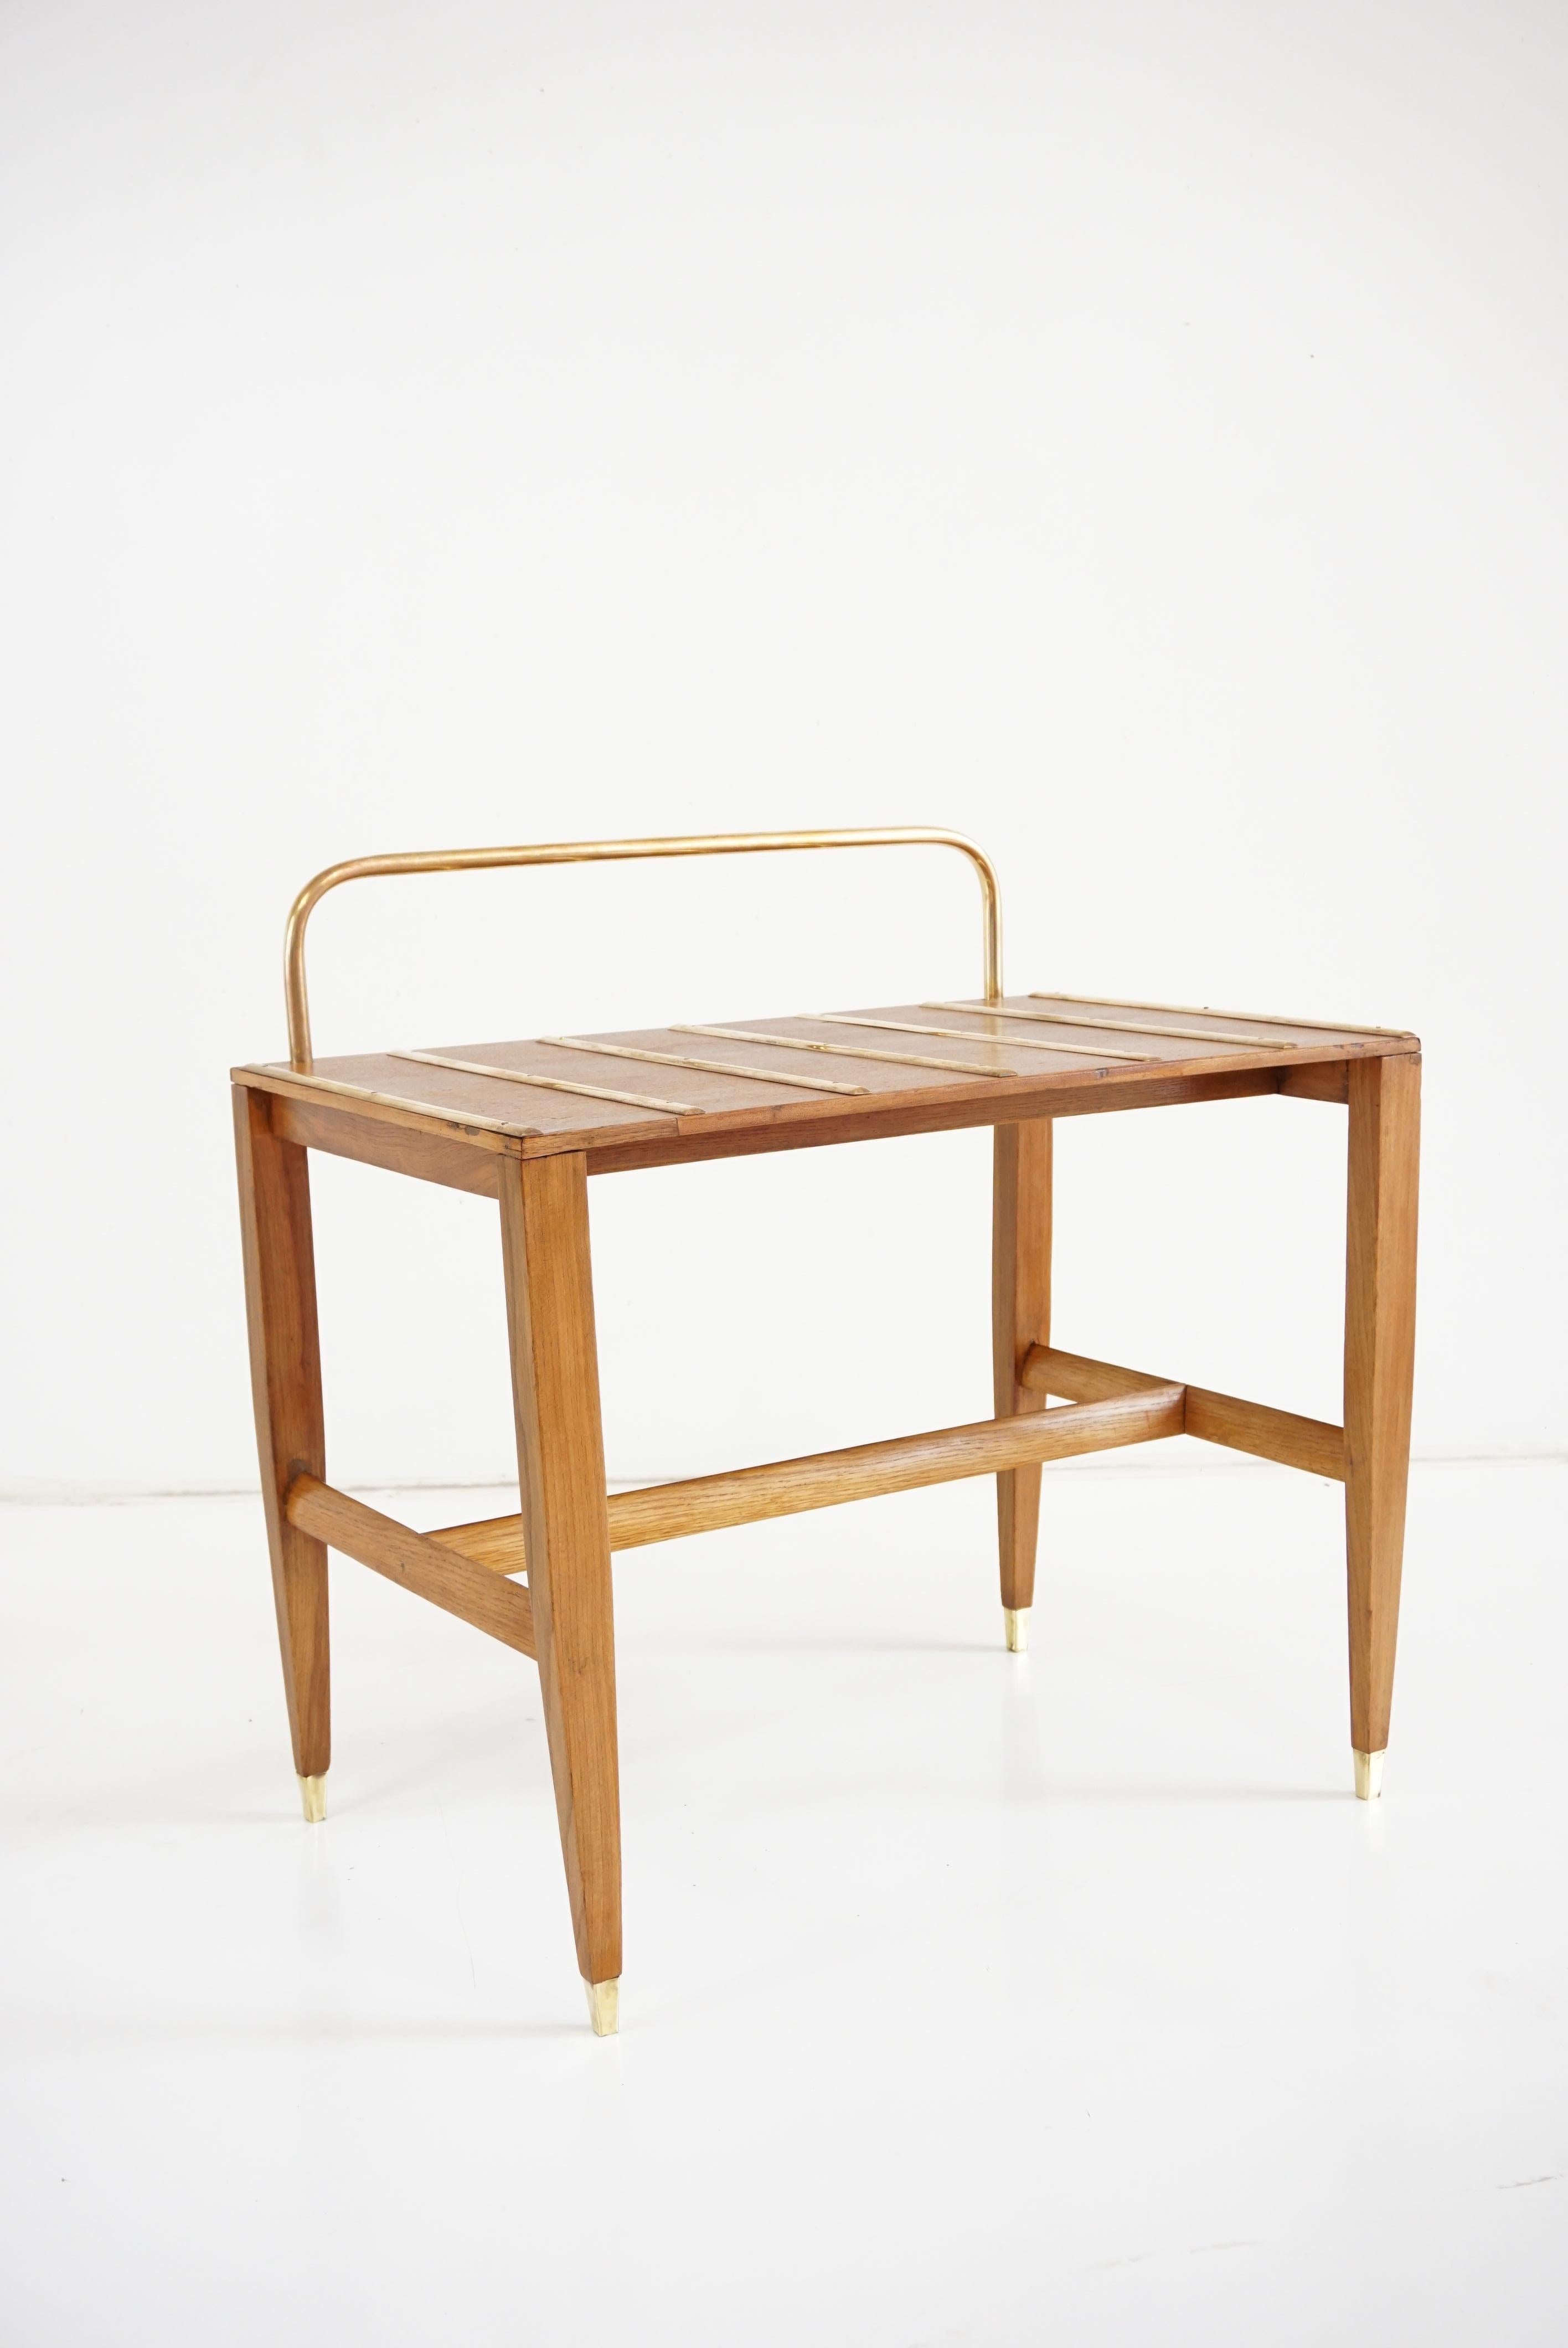 Gio Ponti Walnut Side Table, Luggage Rack for Hotel Royal Naples, 1955 In Good Condition For Sale In Rome, IT